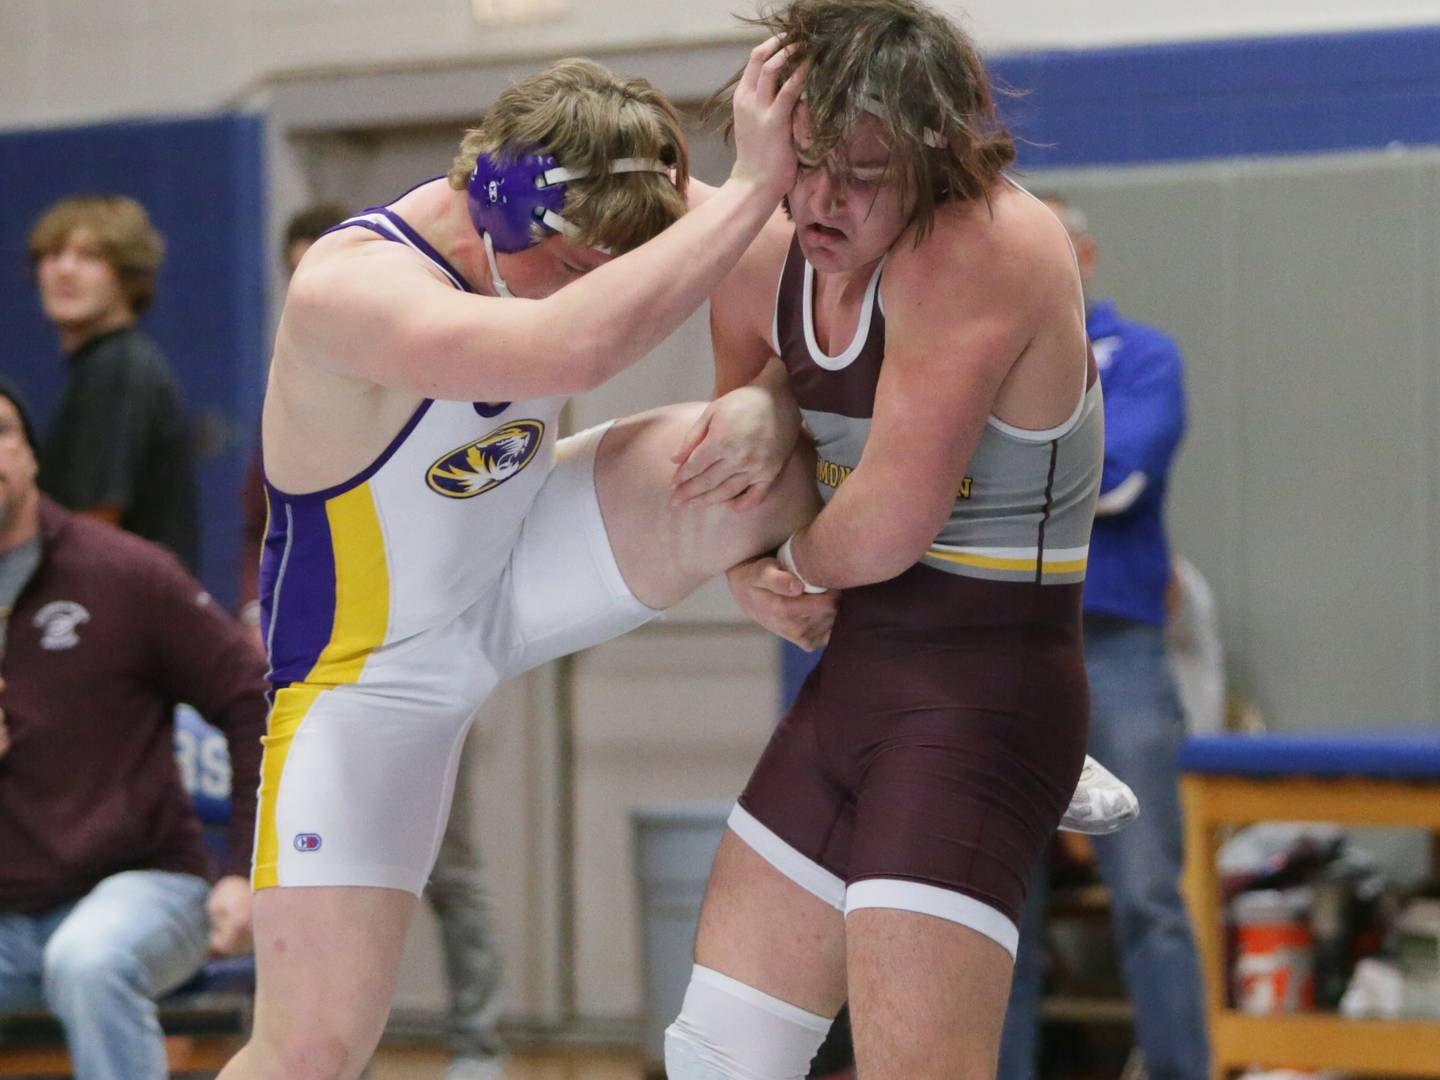 Richmond-Burton's Brock Wood, wrestles Sherrard's Walker Anderson, in the 220 weight class at the Class 1A wrestling Sectional meet on Saturday Feb. 12, 2022 in Princeton.